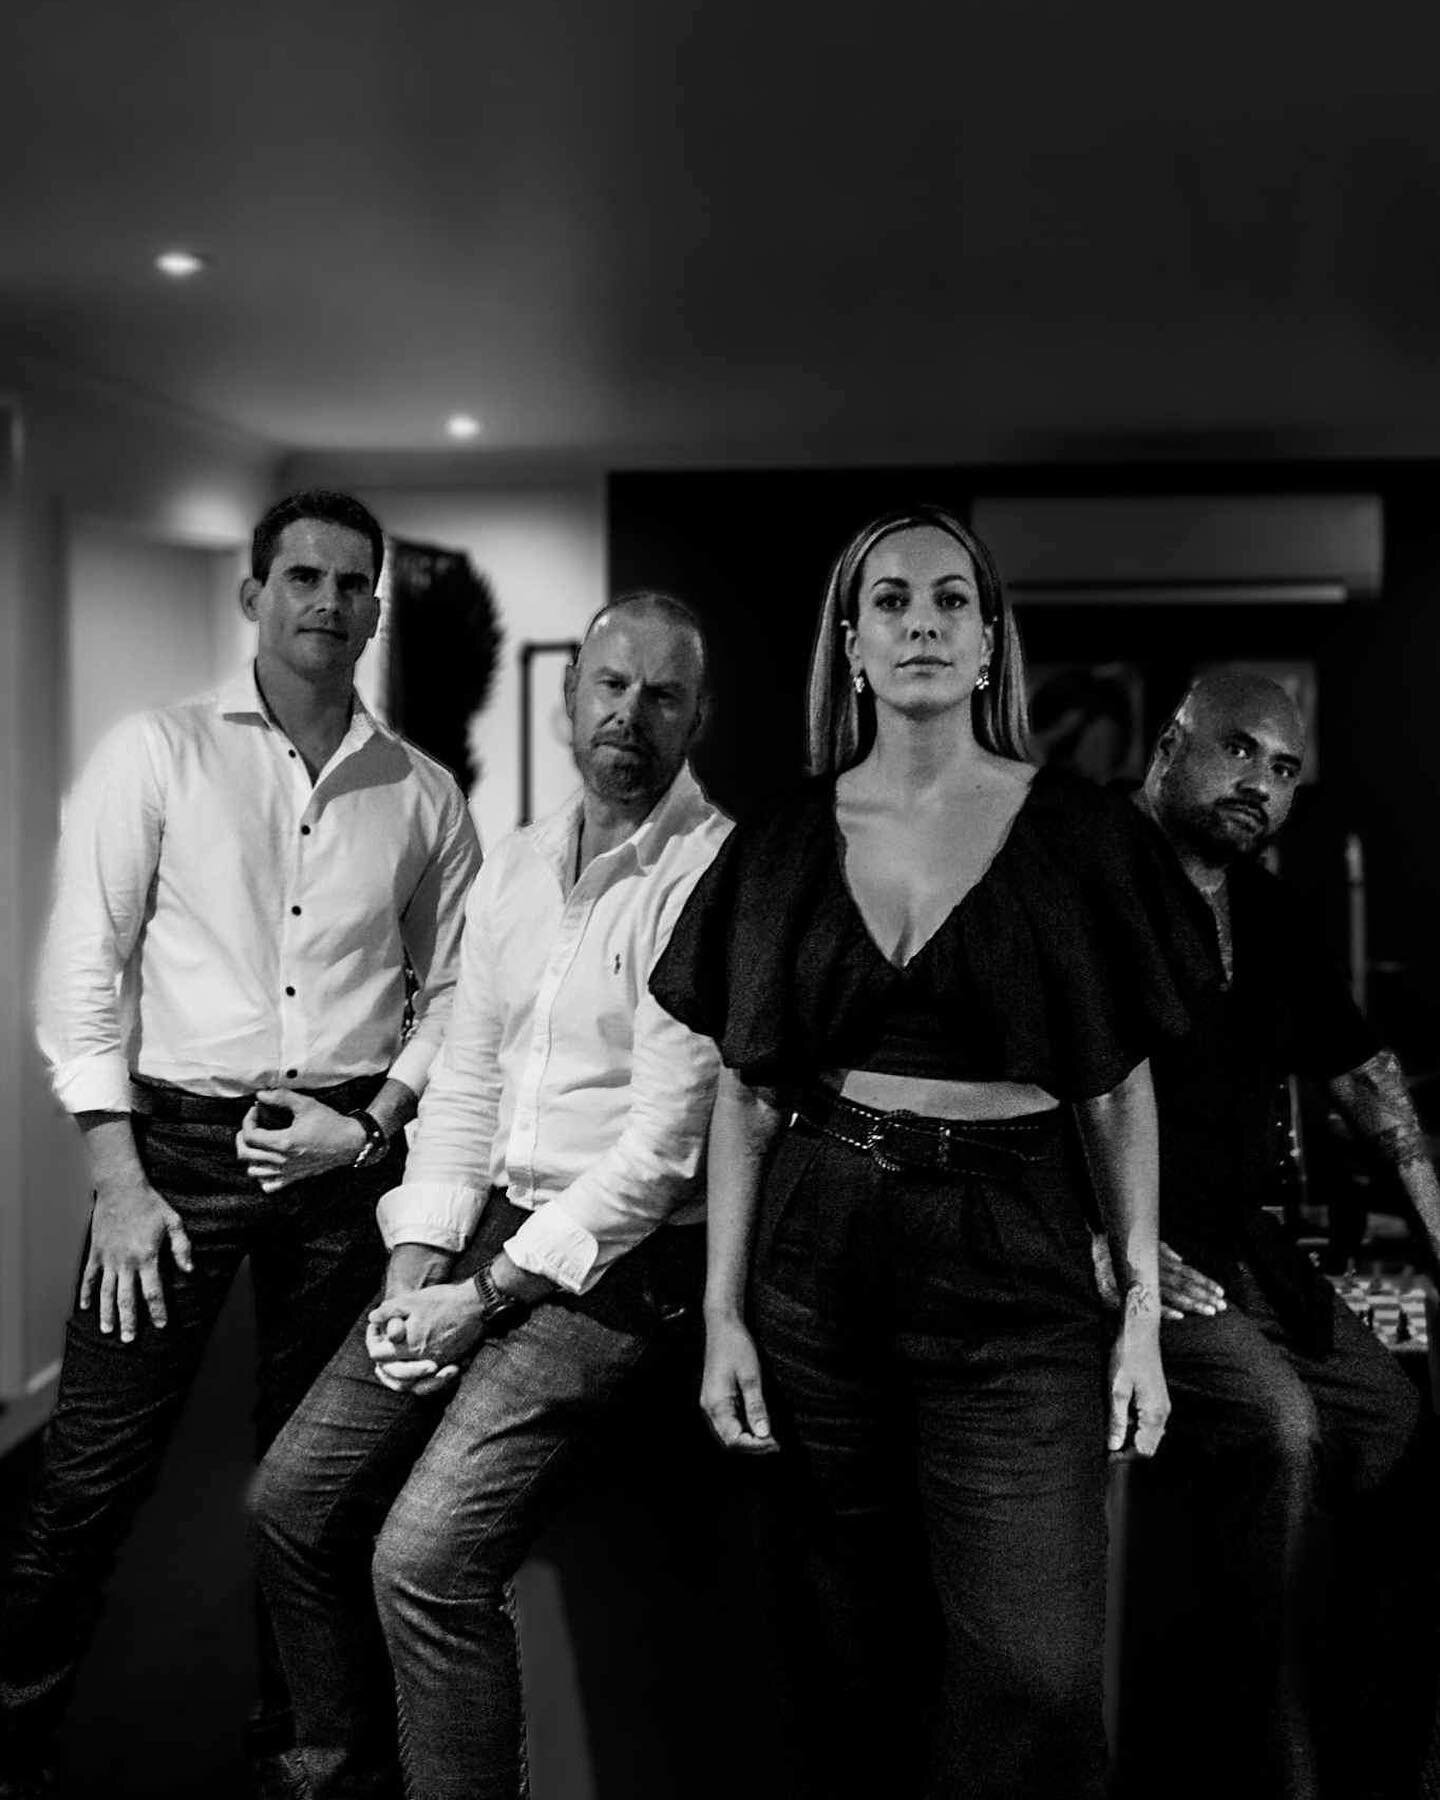 New band alert ‼️ 
Introducing HIGH STREET, available for weddings and events across GC, Brisbane &amp; Sunny Coast.
Covering a mix of the classics through to todays pop hits! Check them out here @highstreetband_ 
#weddingband #weddingmusic #weddinge